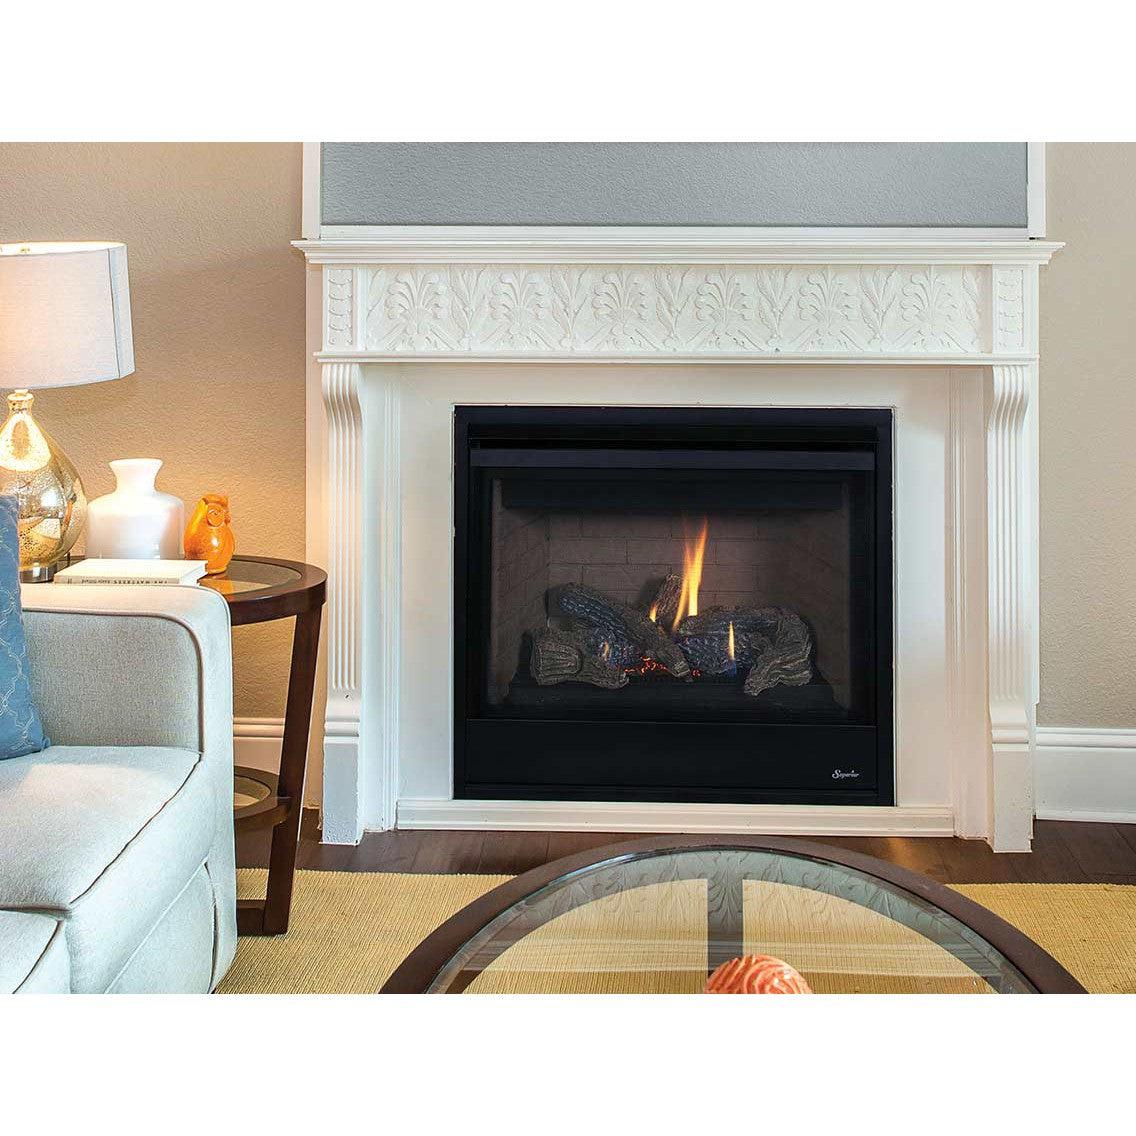 Superior DRT2035 35" Traditional Direct Rear Vent Natural Gas Fireplace With Electronic Ignition